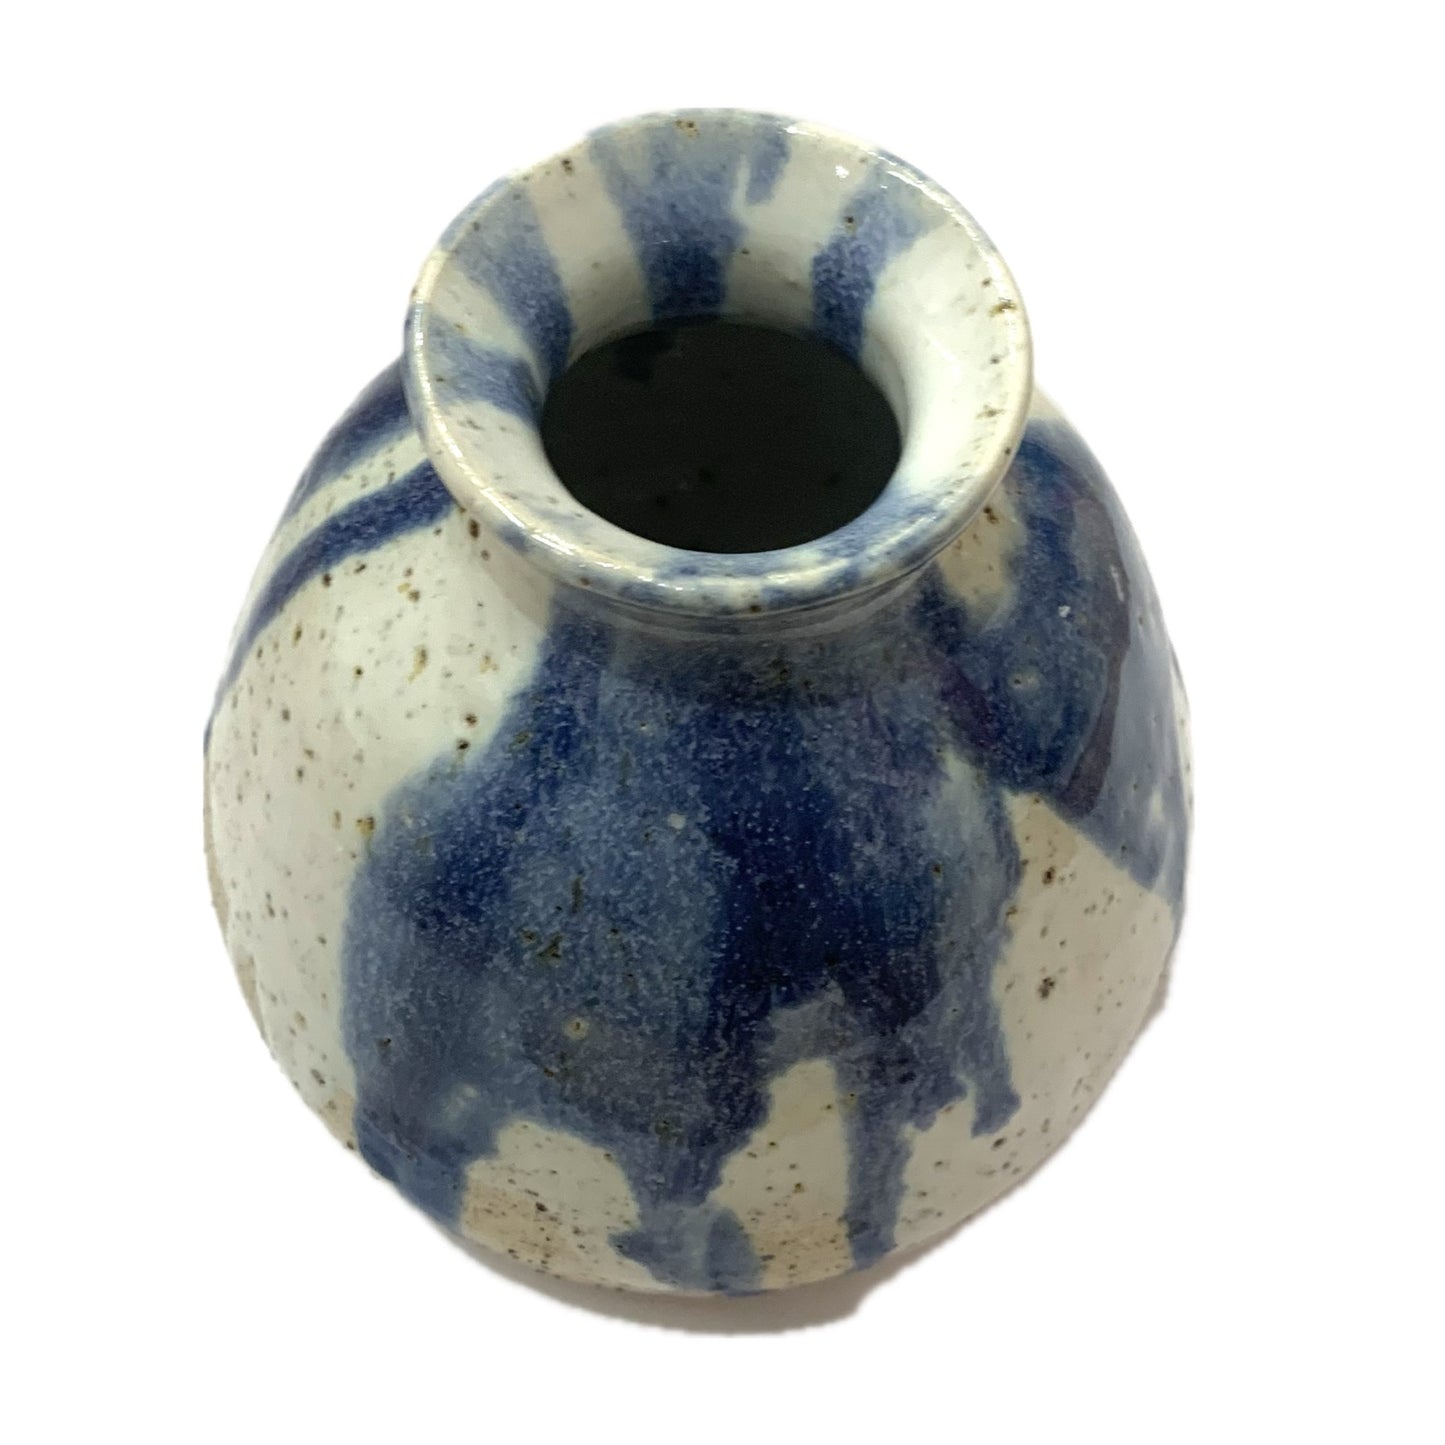 EARTH BY HAND- Small Dribble Vases- Blue & White